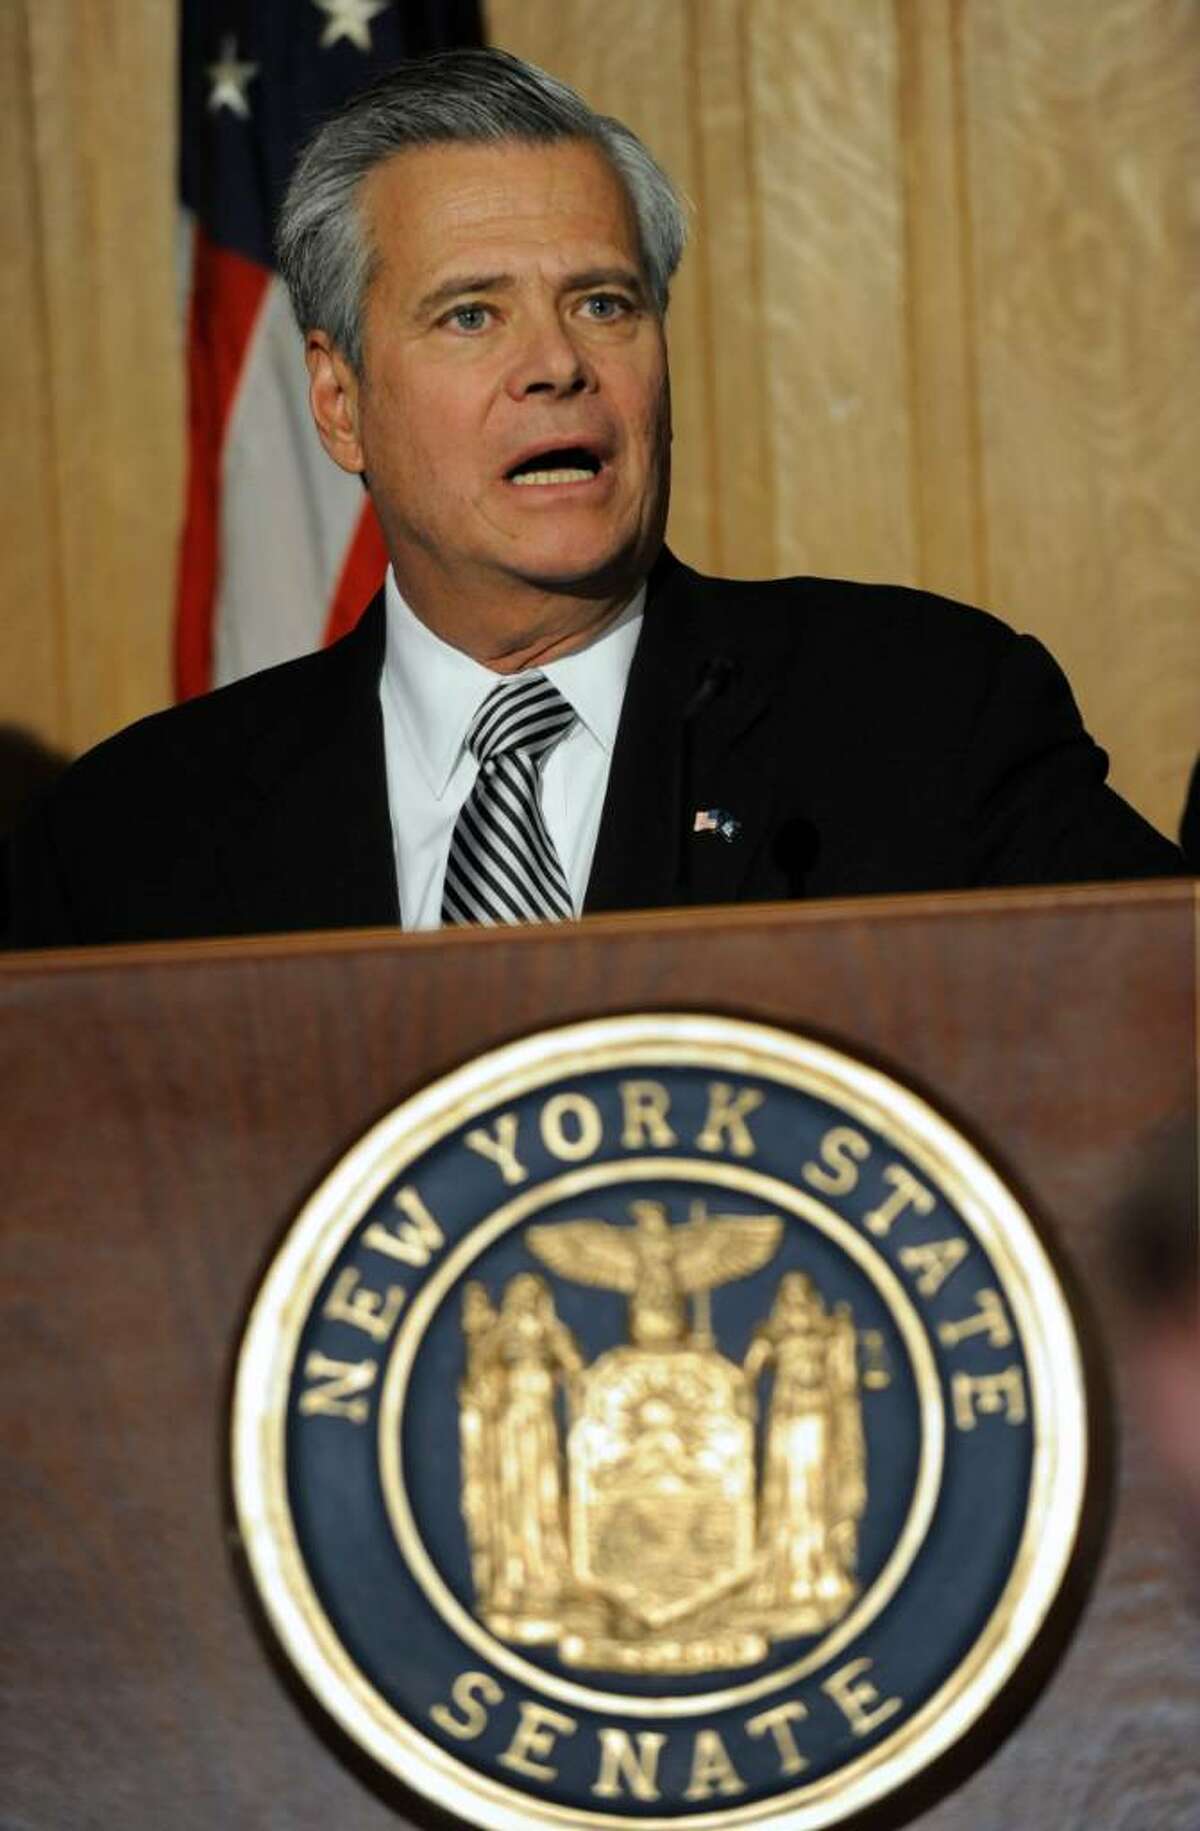 Senate Minority Leader Dean Skelos gives the GOP view on the State of the State Message at the Capitol in Albany on January 6, 2010. (Skip Dickstein/ Times Union)